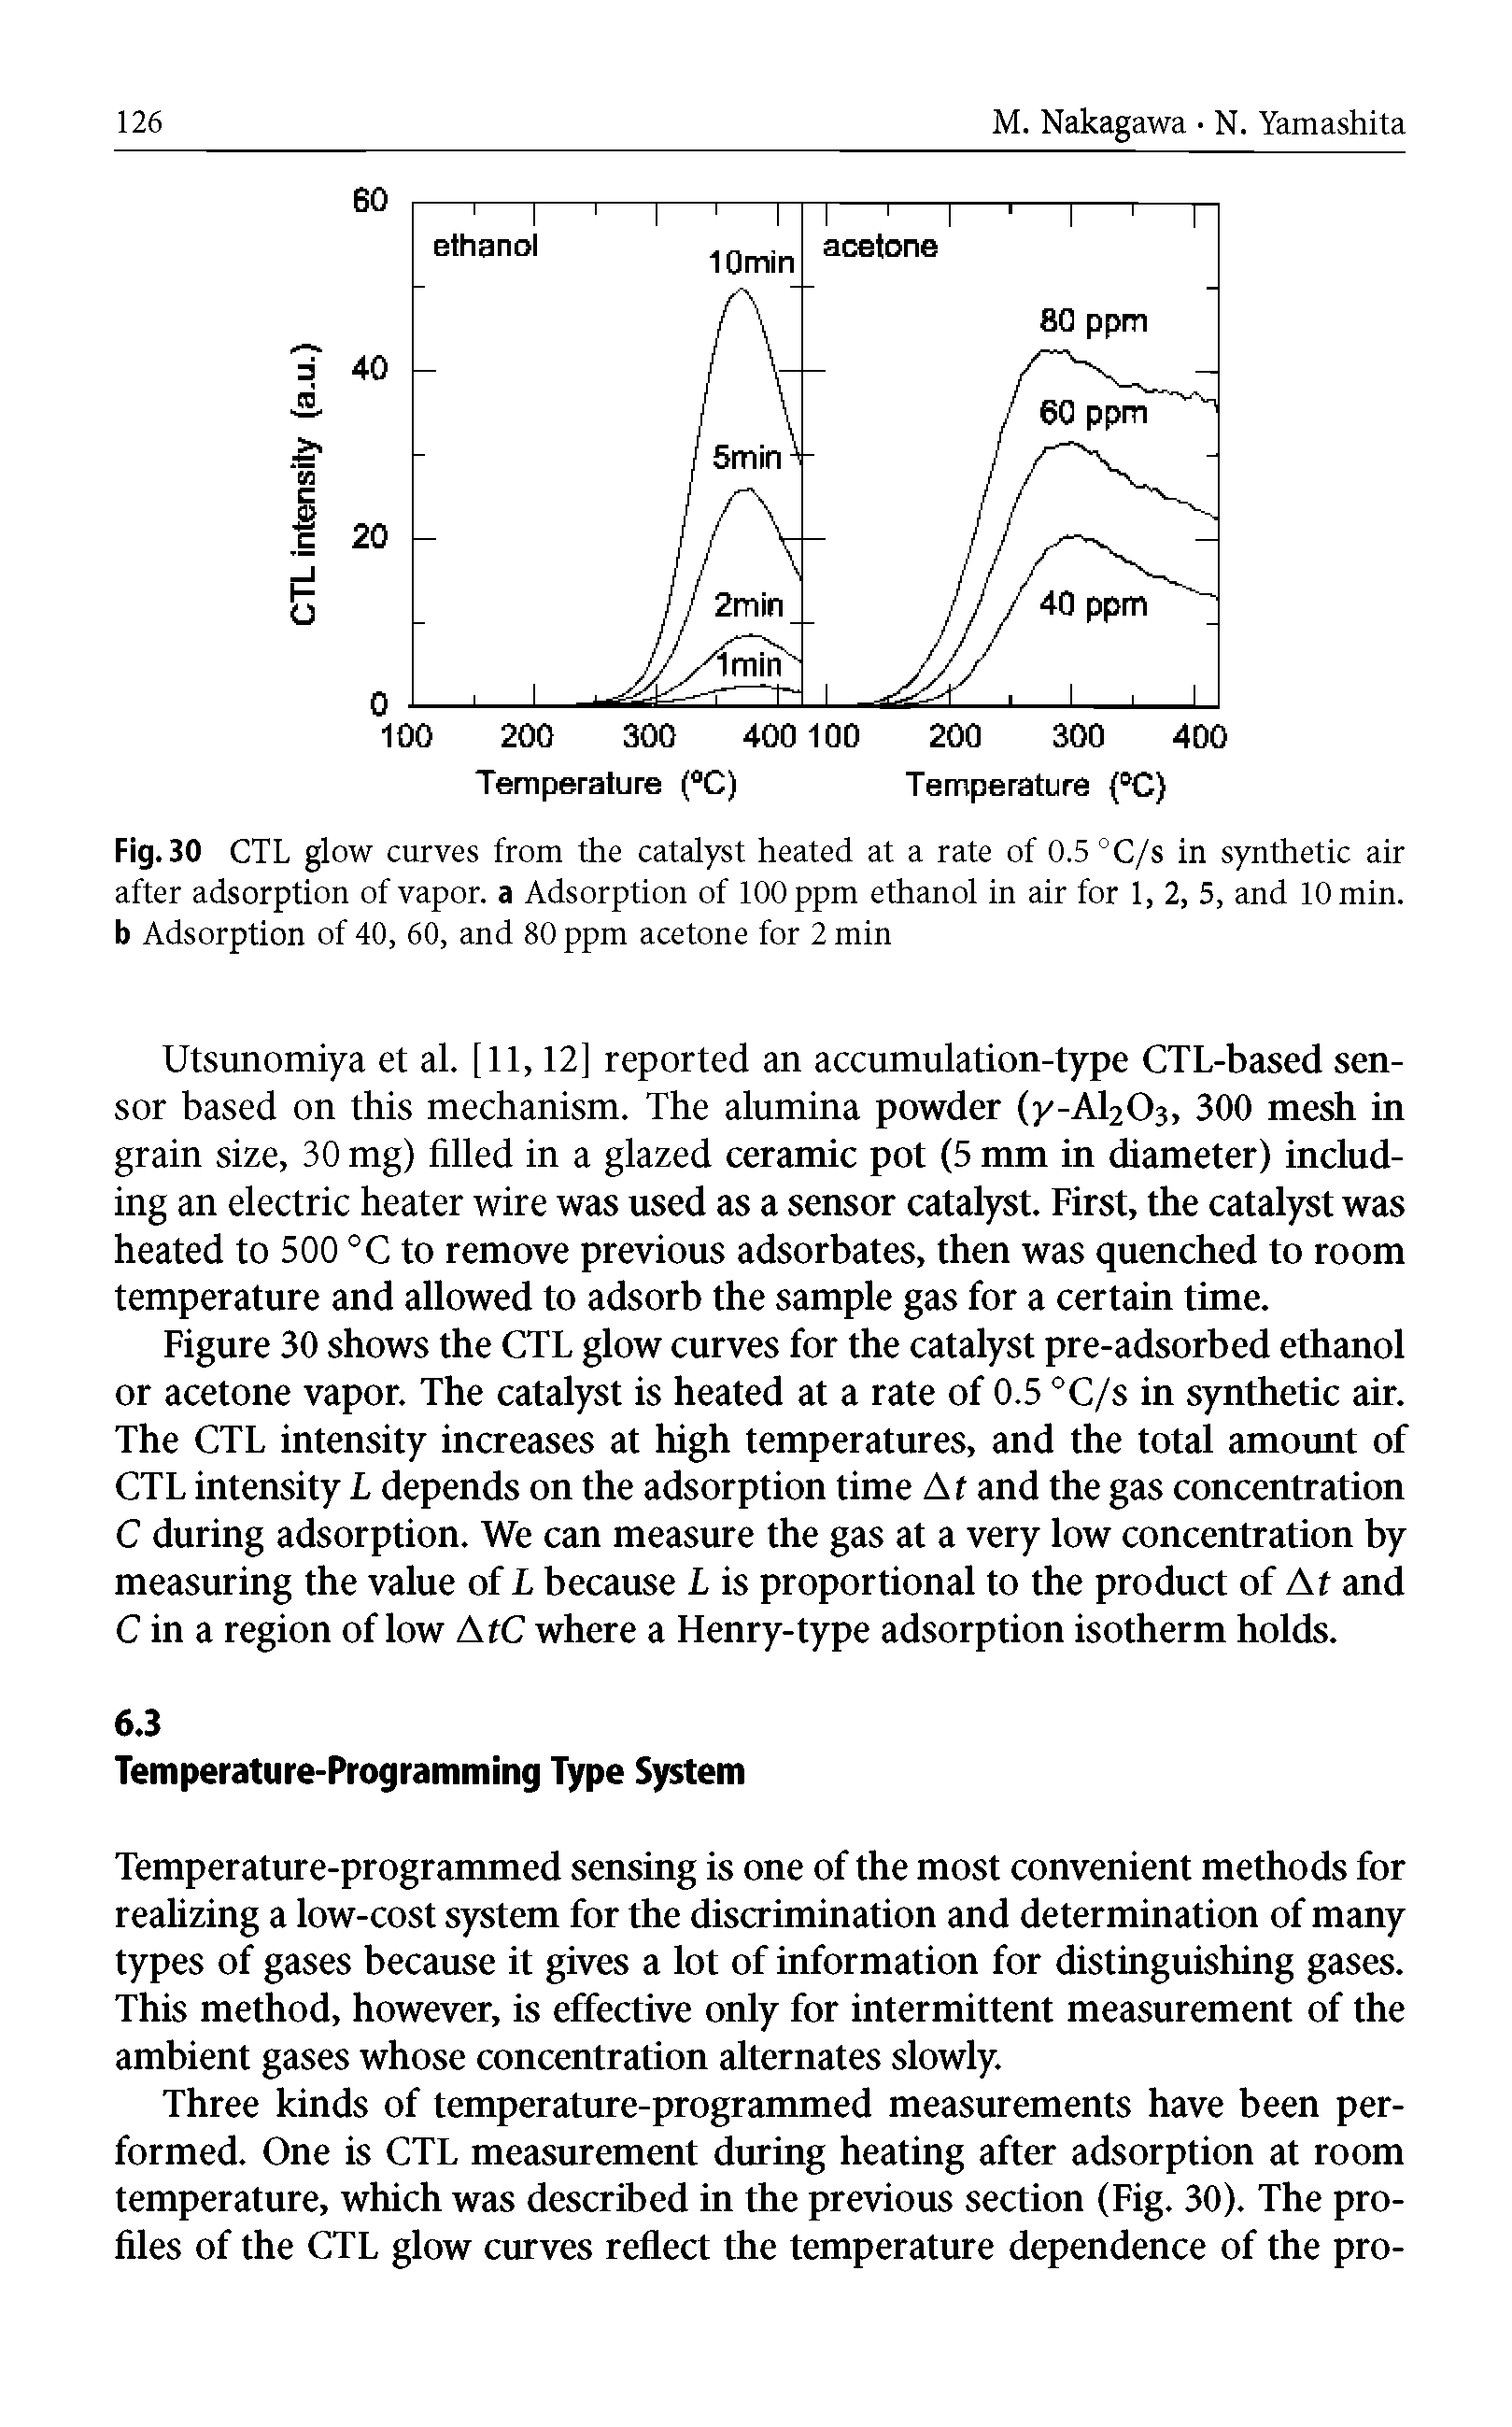 Fig. 30 CTL glow curves from the catalyst heated at a rate of 0.5 °C/s in synthetic air after adsorption of vapor, a Adsorption of 100 ppm ethanol in air for 1, 2, 5, and 10 min. b Adsorption of 40, 60, and 80 ppm acetone for 2 min...